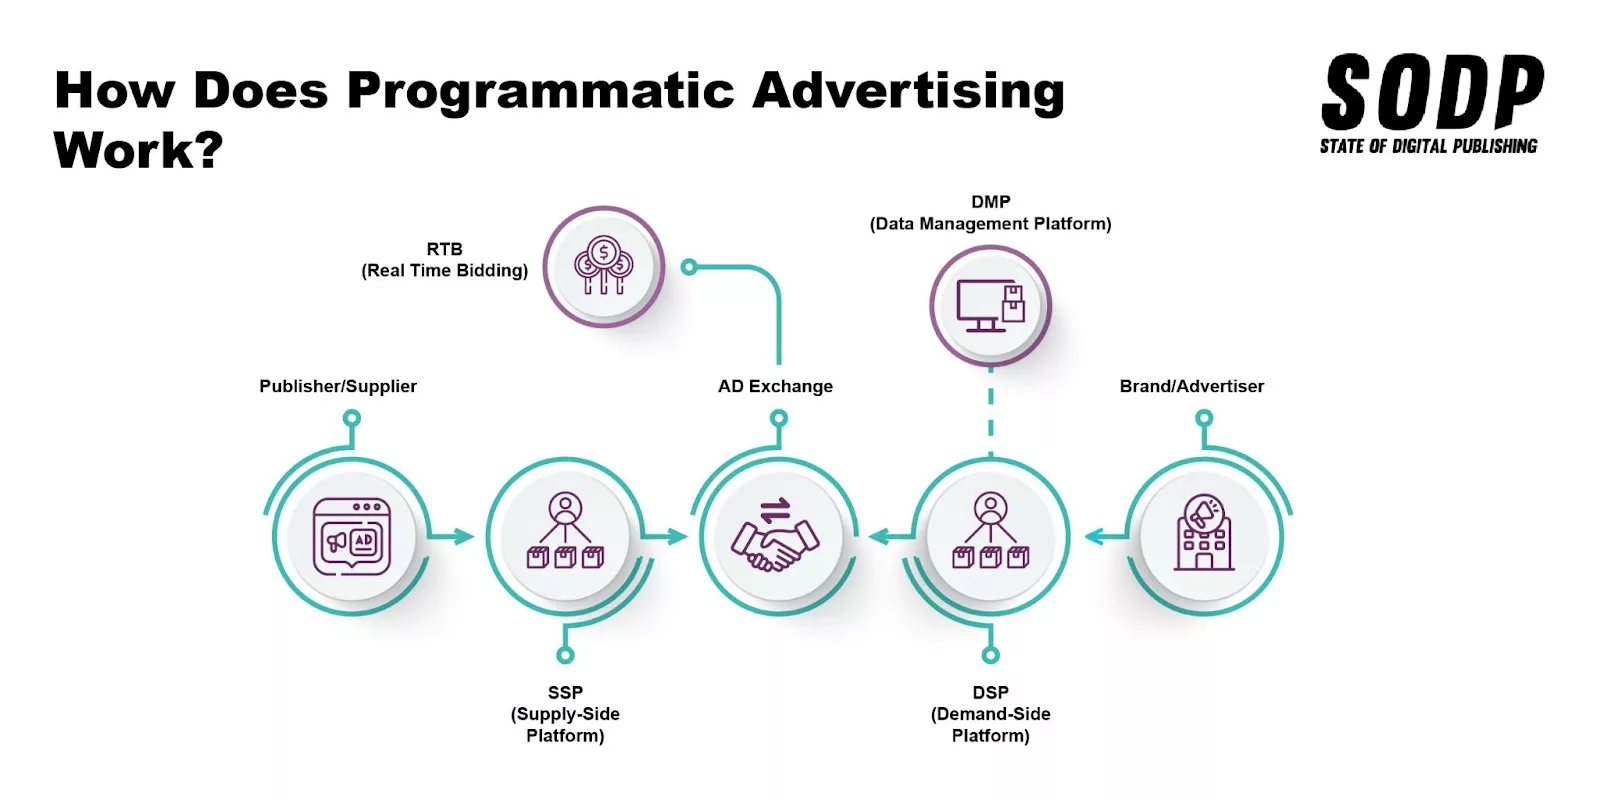 How Does Programmatic Advertising Work?